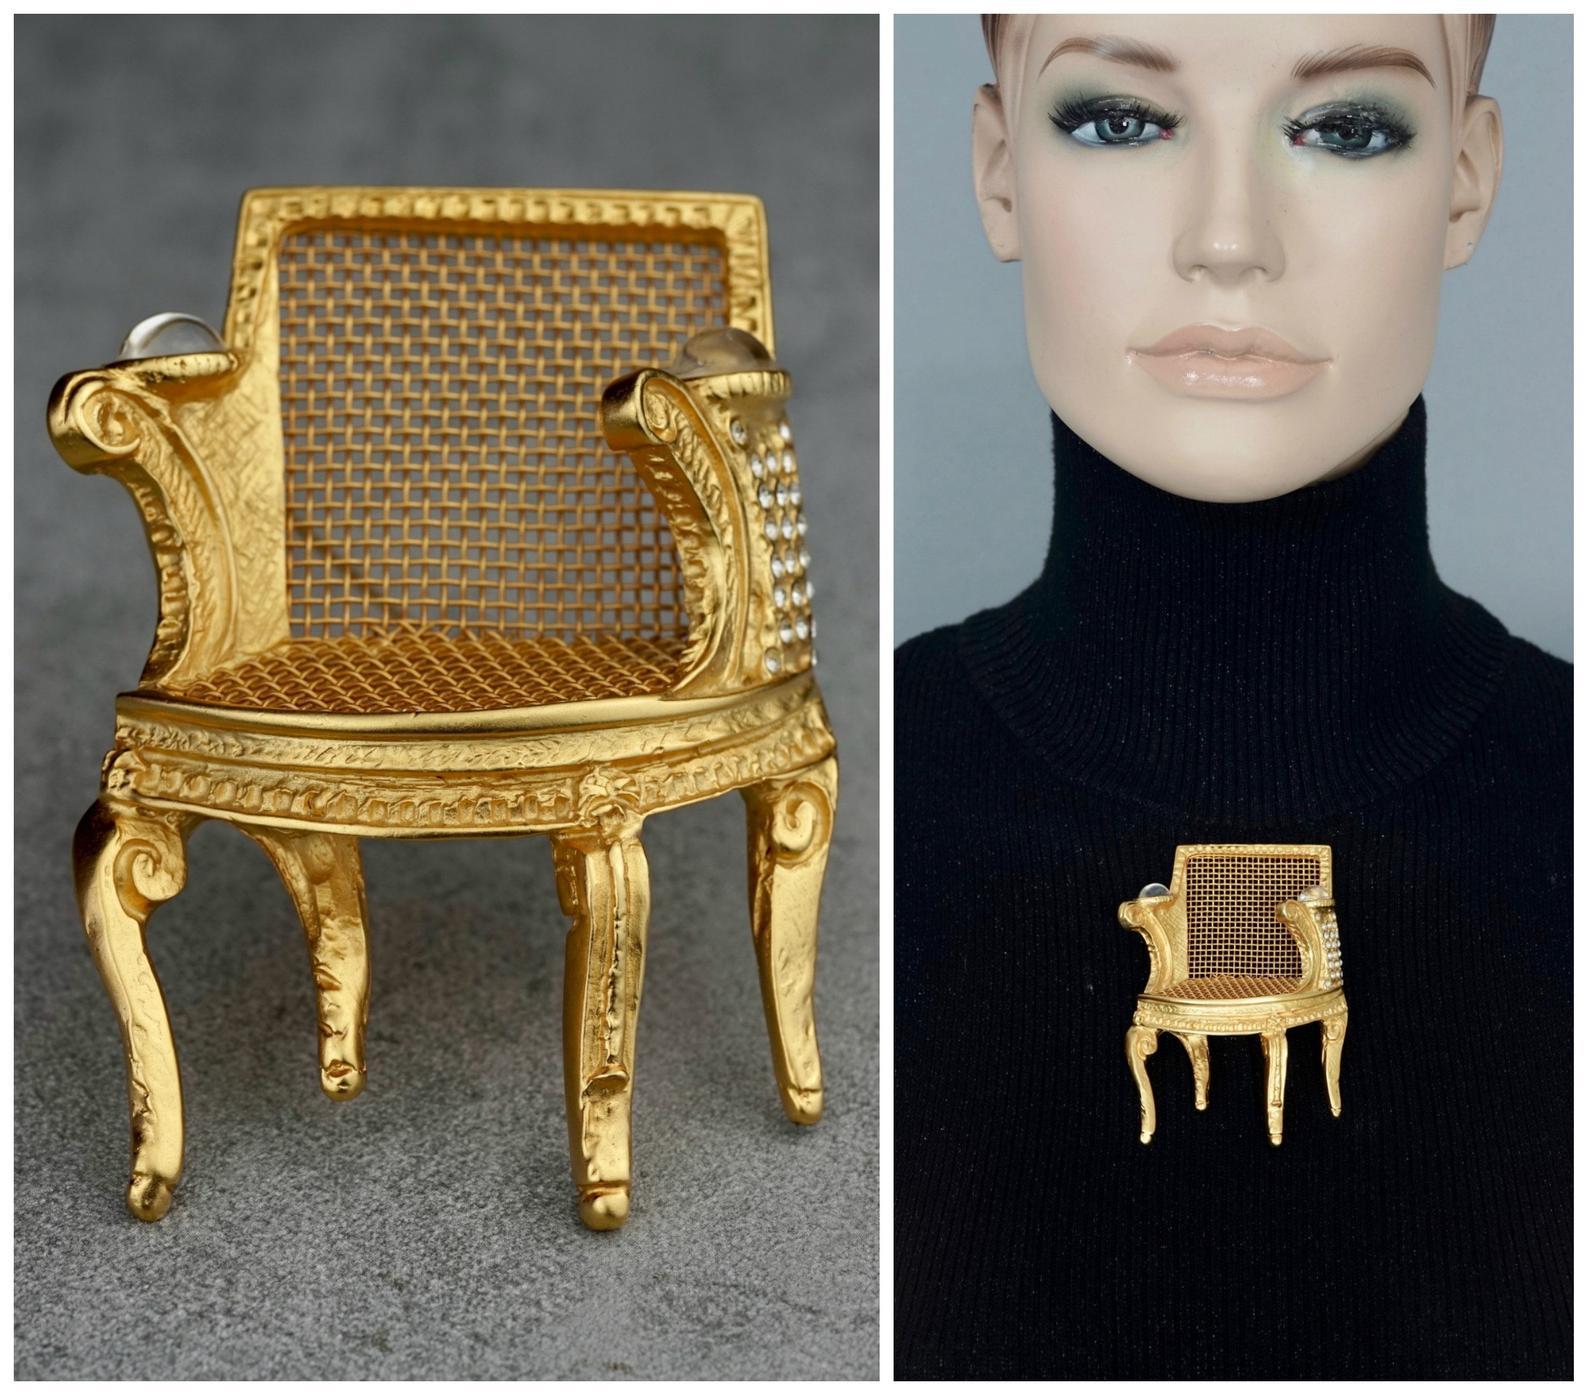 Vintage Massive KARL LAGERFELD Louis XVI Chair Brooch

Measurements:
Height: 3.54 inches (9 cm)
Width: 2.44 inch (6.2 cm)
Depth: 0.98 inch (2.5 cm)

Features:
- 100% Authentic KARL LAGERFELD.
- Massive Louis XVI style chair.
- Embellished with clear